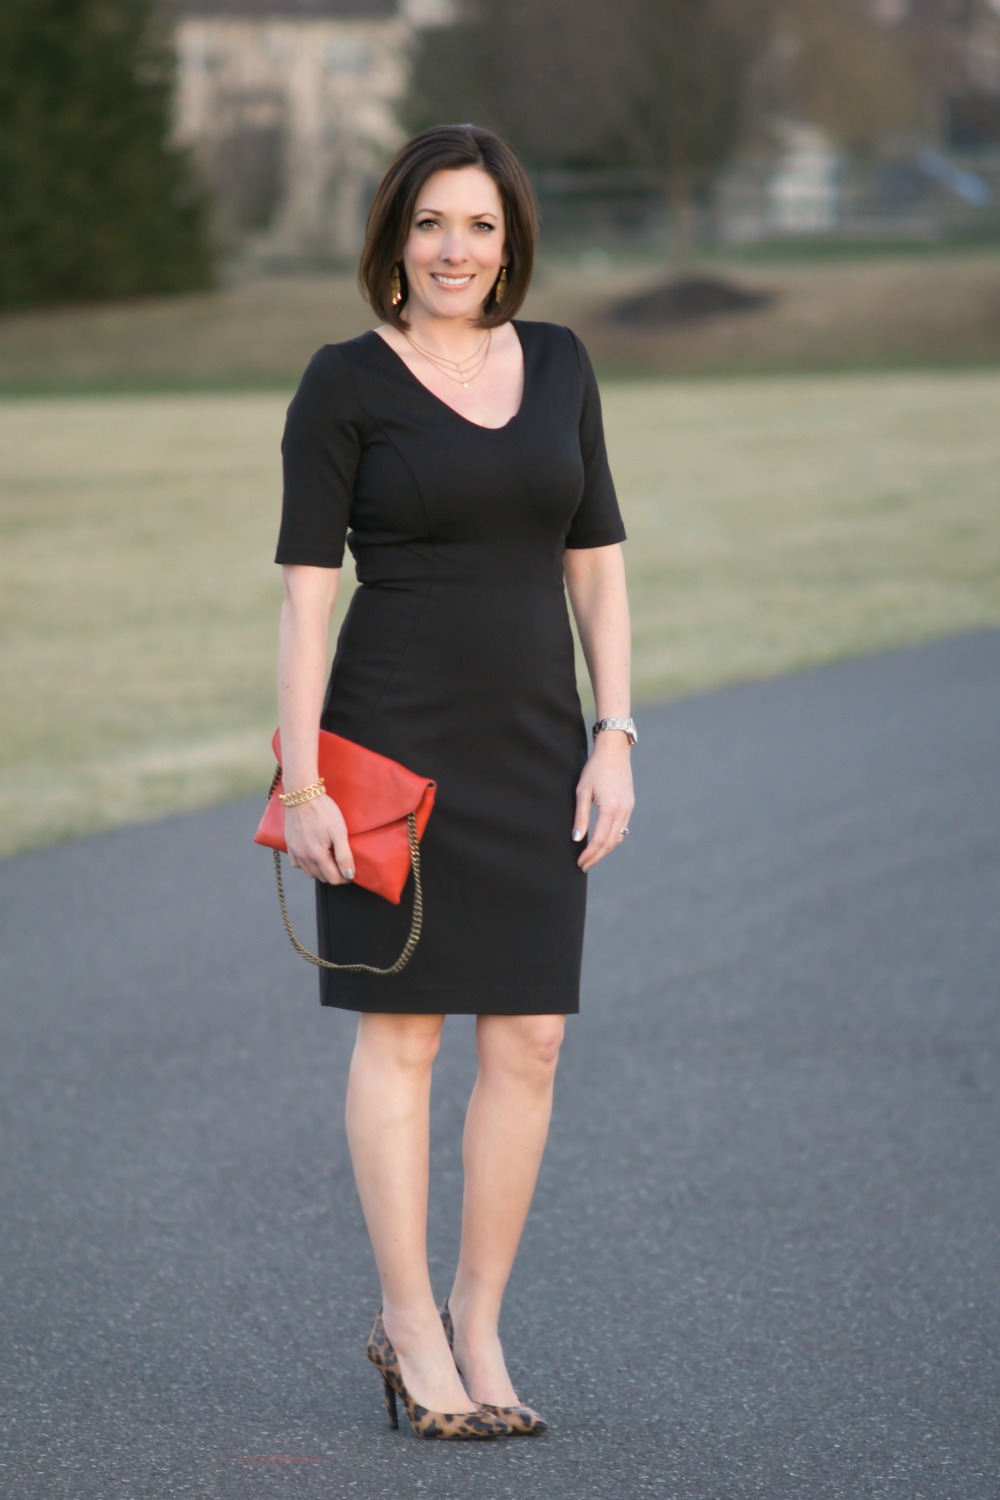 How to Accessorize a LBD: with Leopard Pumps + Red Clutch